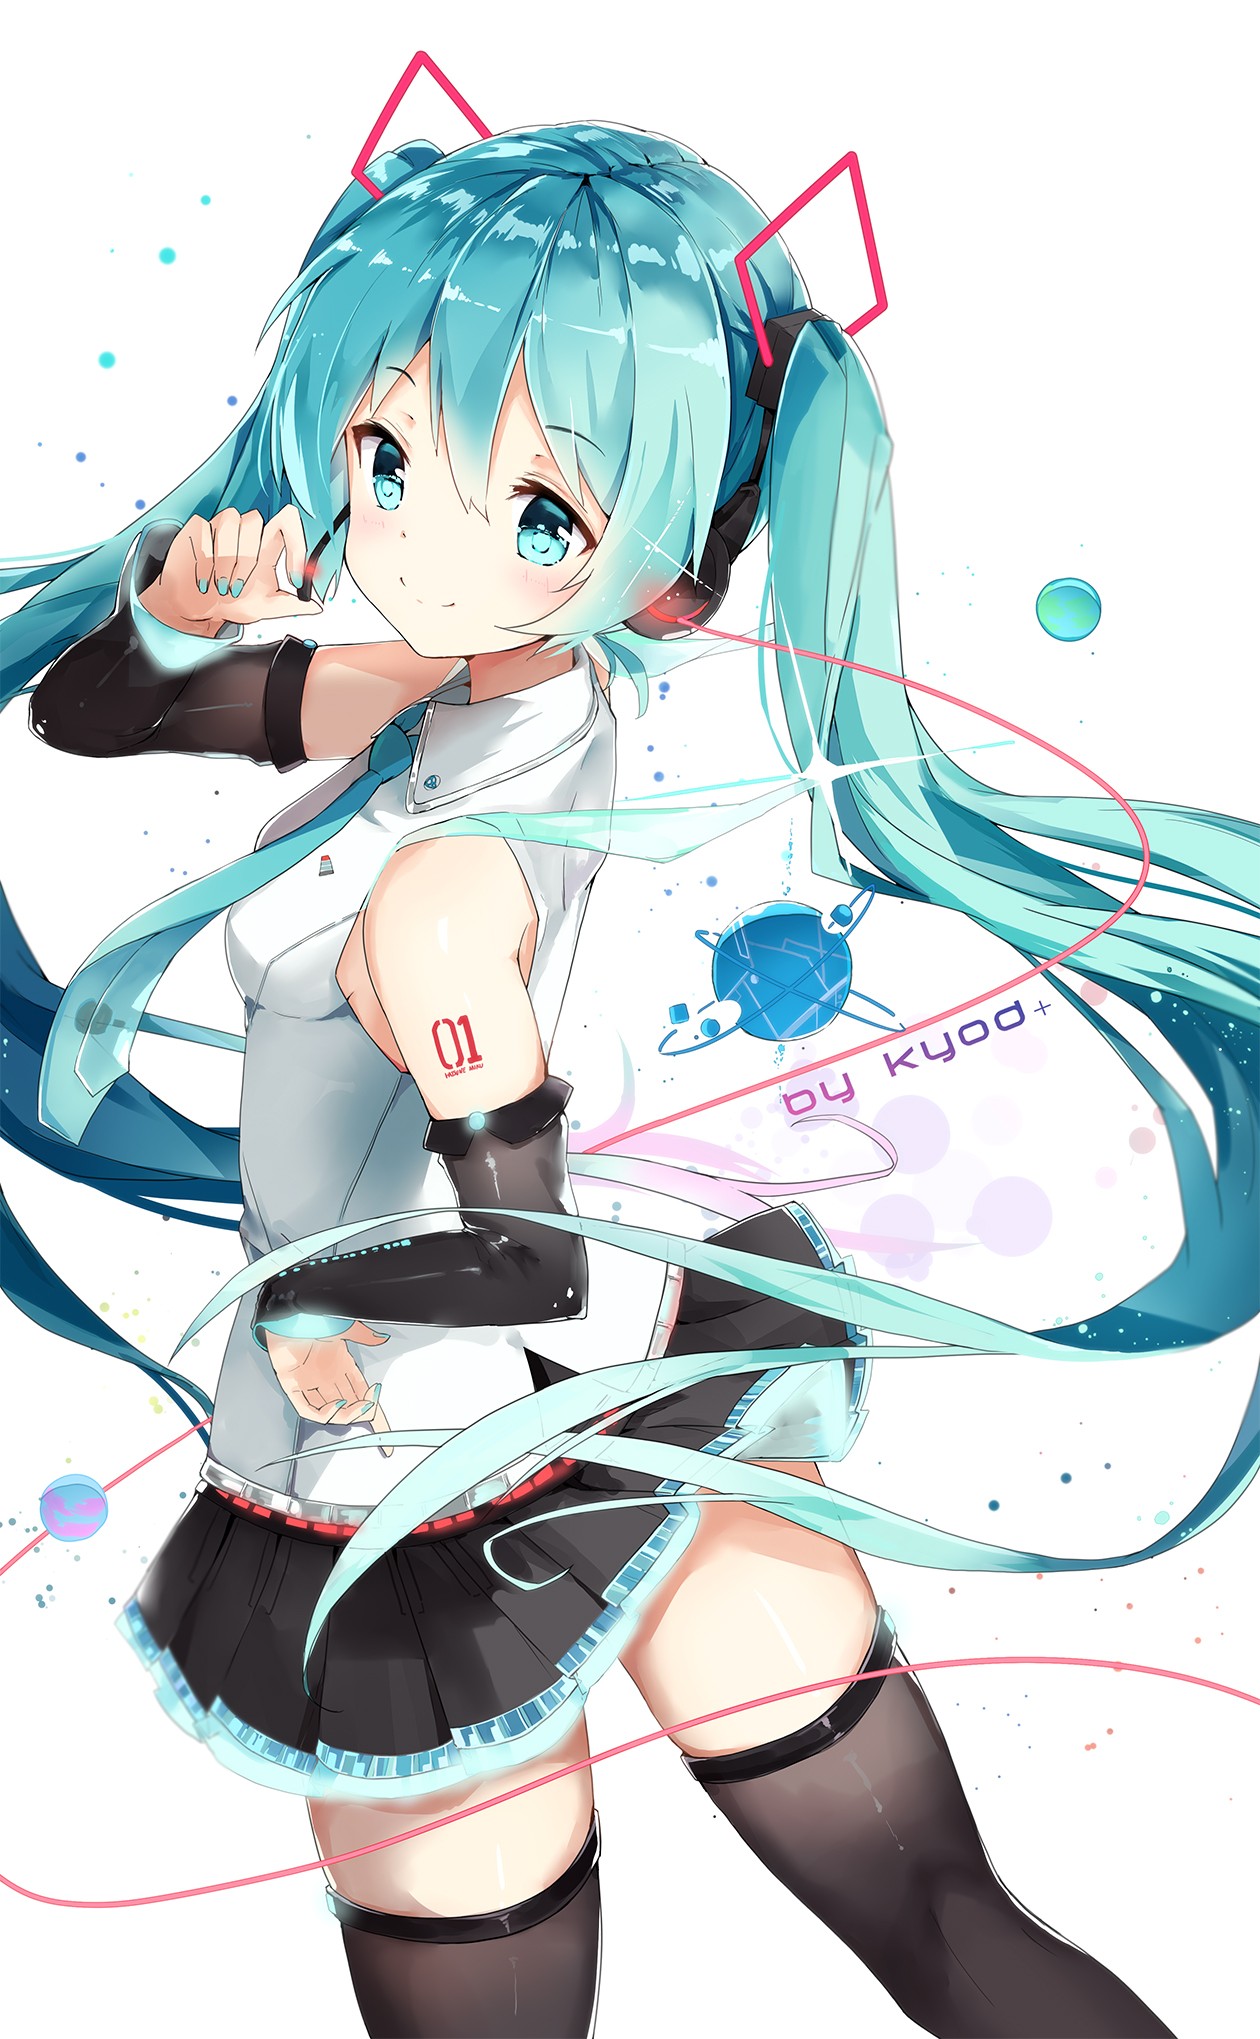 Anime 1260x2039 anime anime girls Vocaloid Hatsune Miku headphones tattoo long hair cyan hair skirt black skirts stockings black stockings smiling cyan nails painted nails looking at viewer tie Pixiv white background